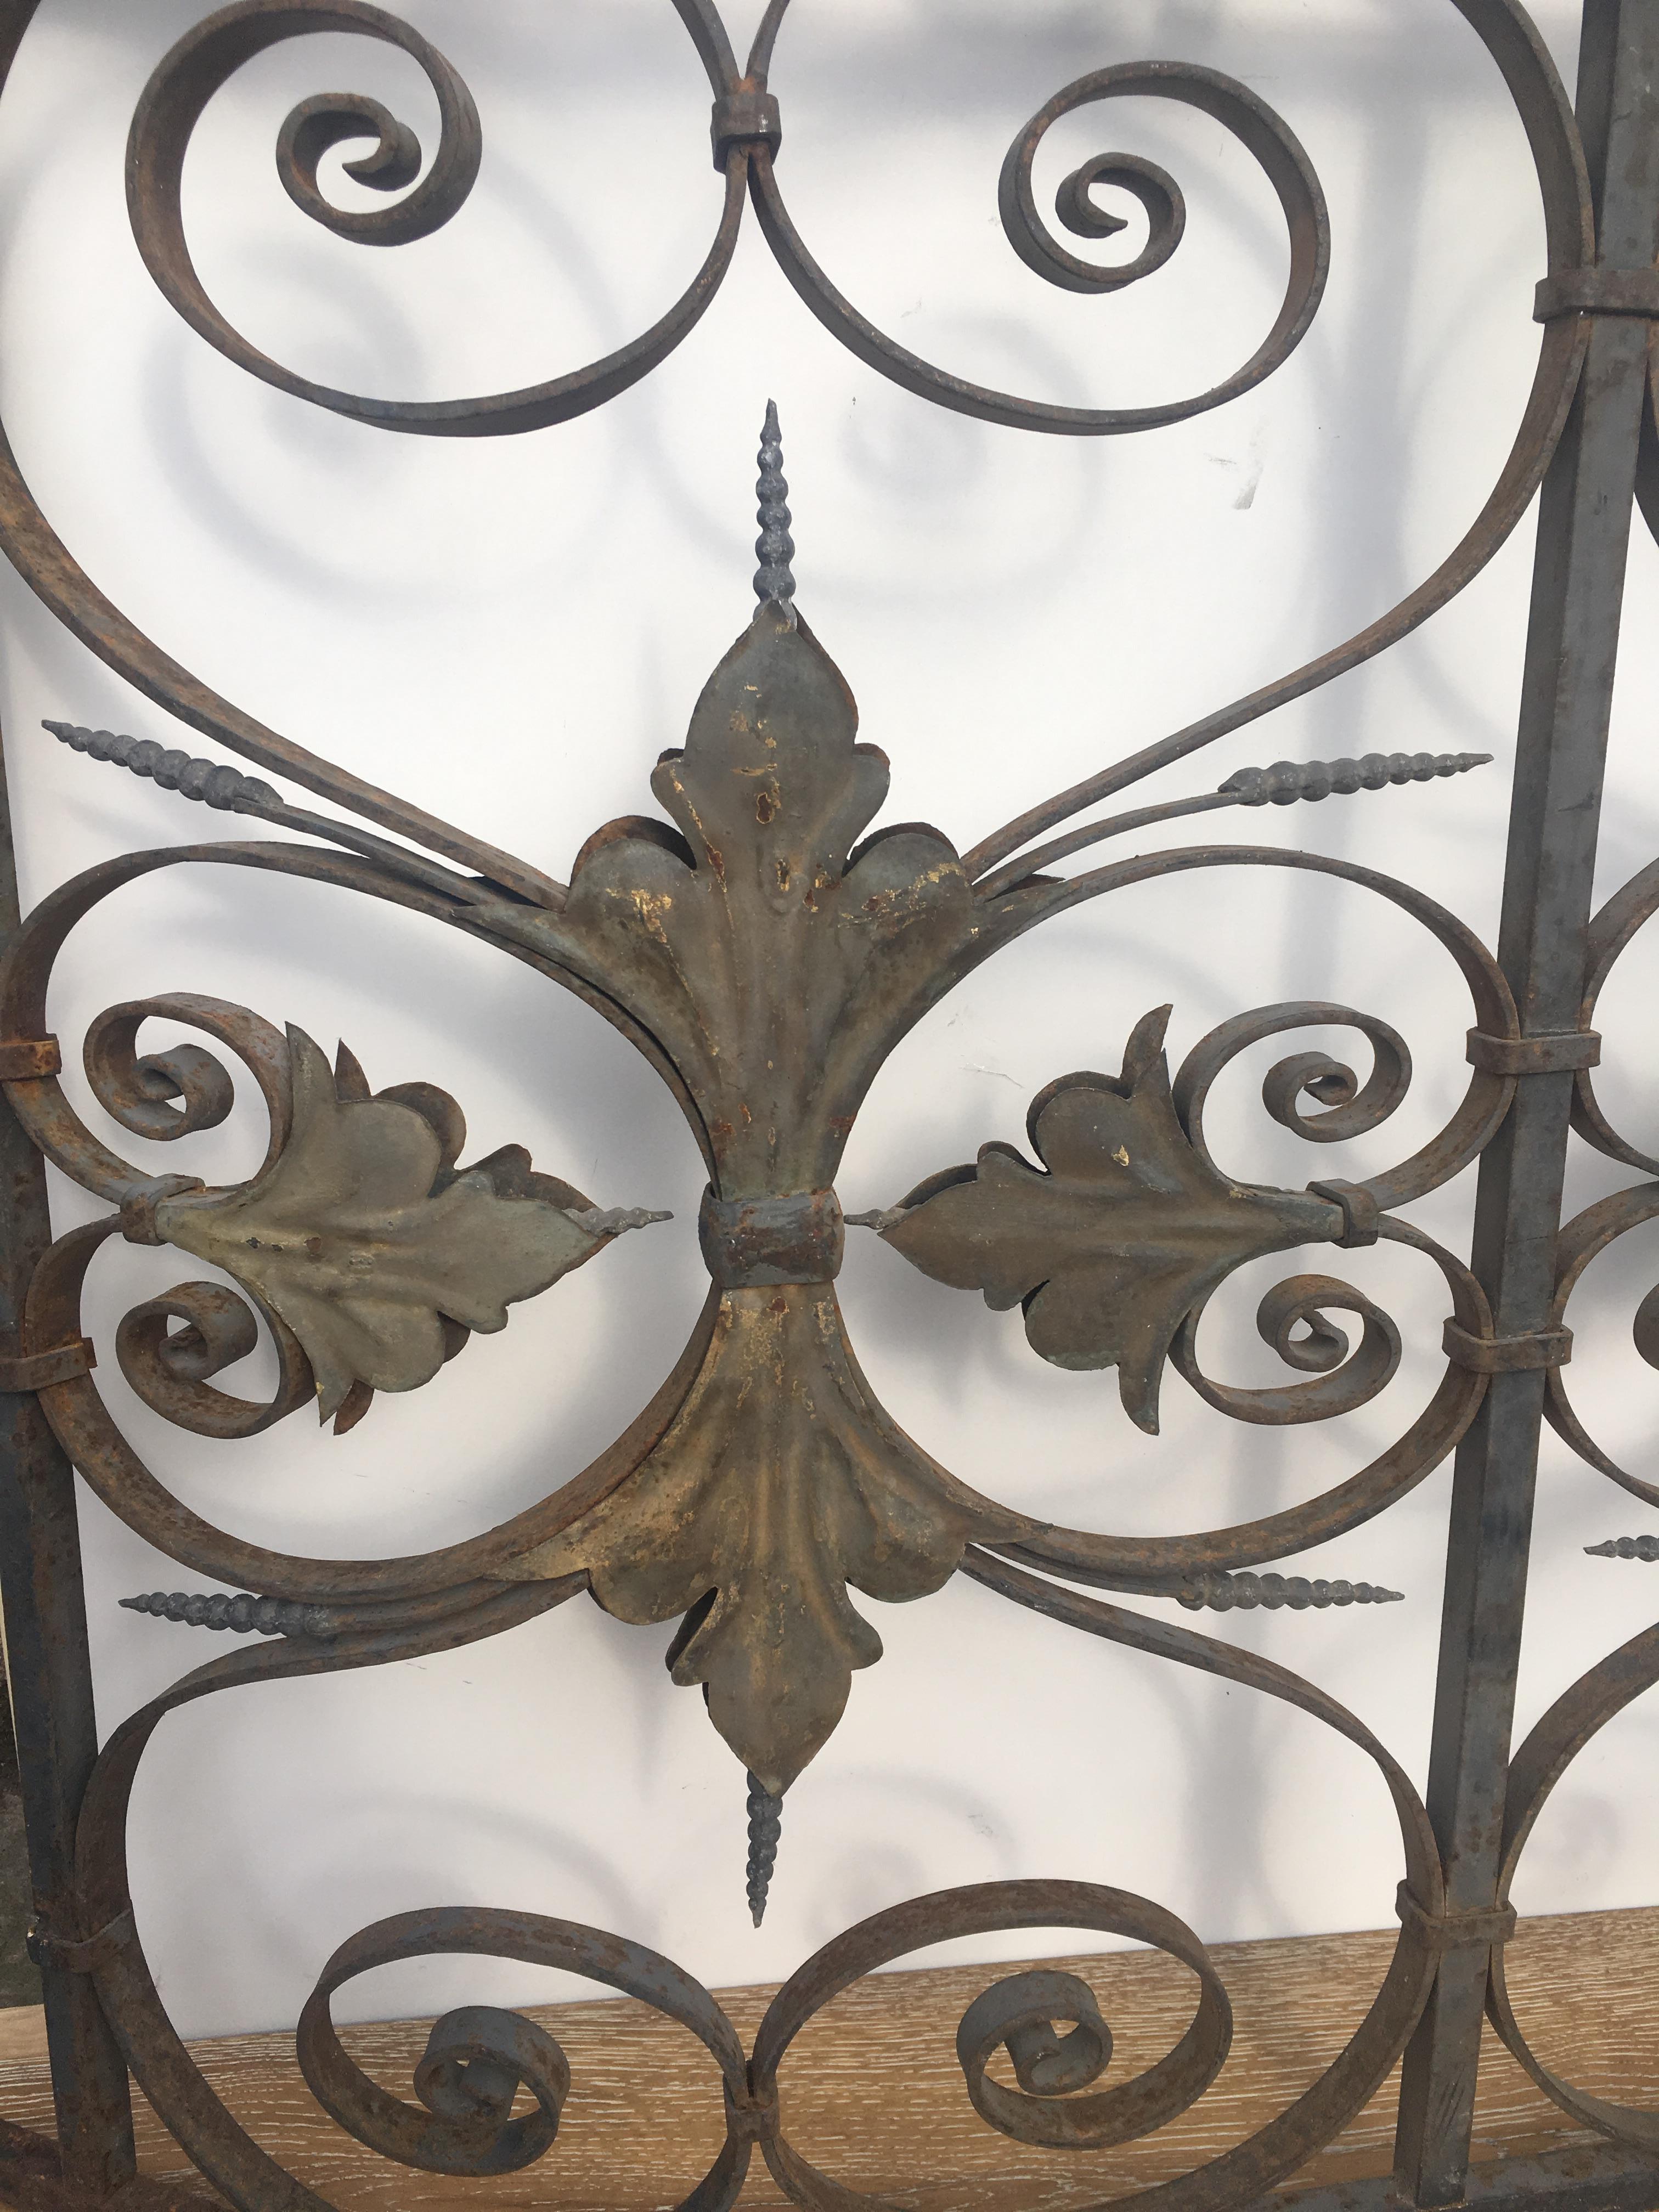 Late 19th century hand crafted iron grilles or balcony railing from the Monte Carlo estate of Aristotle Onassis in the style of Victor Horta. This ornate balcony railing features beautiful feuilles acanthe motifs on both sides elegant swirls and